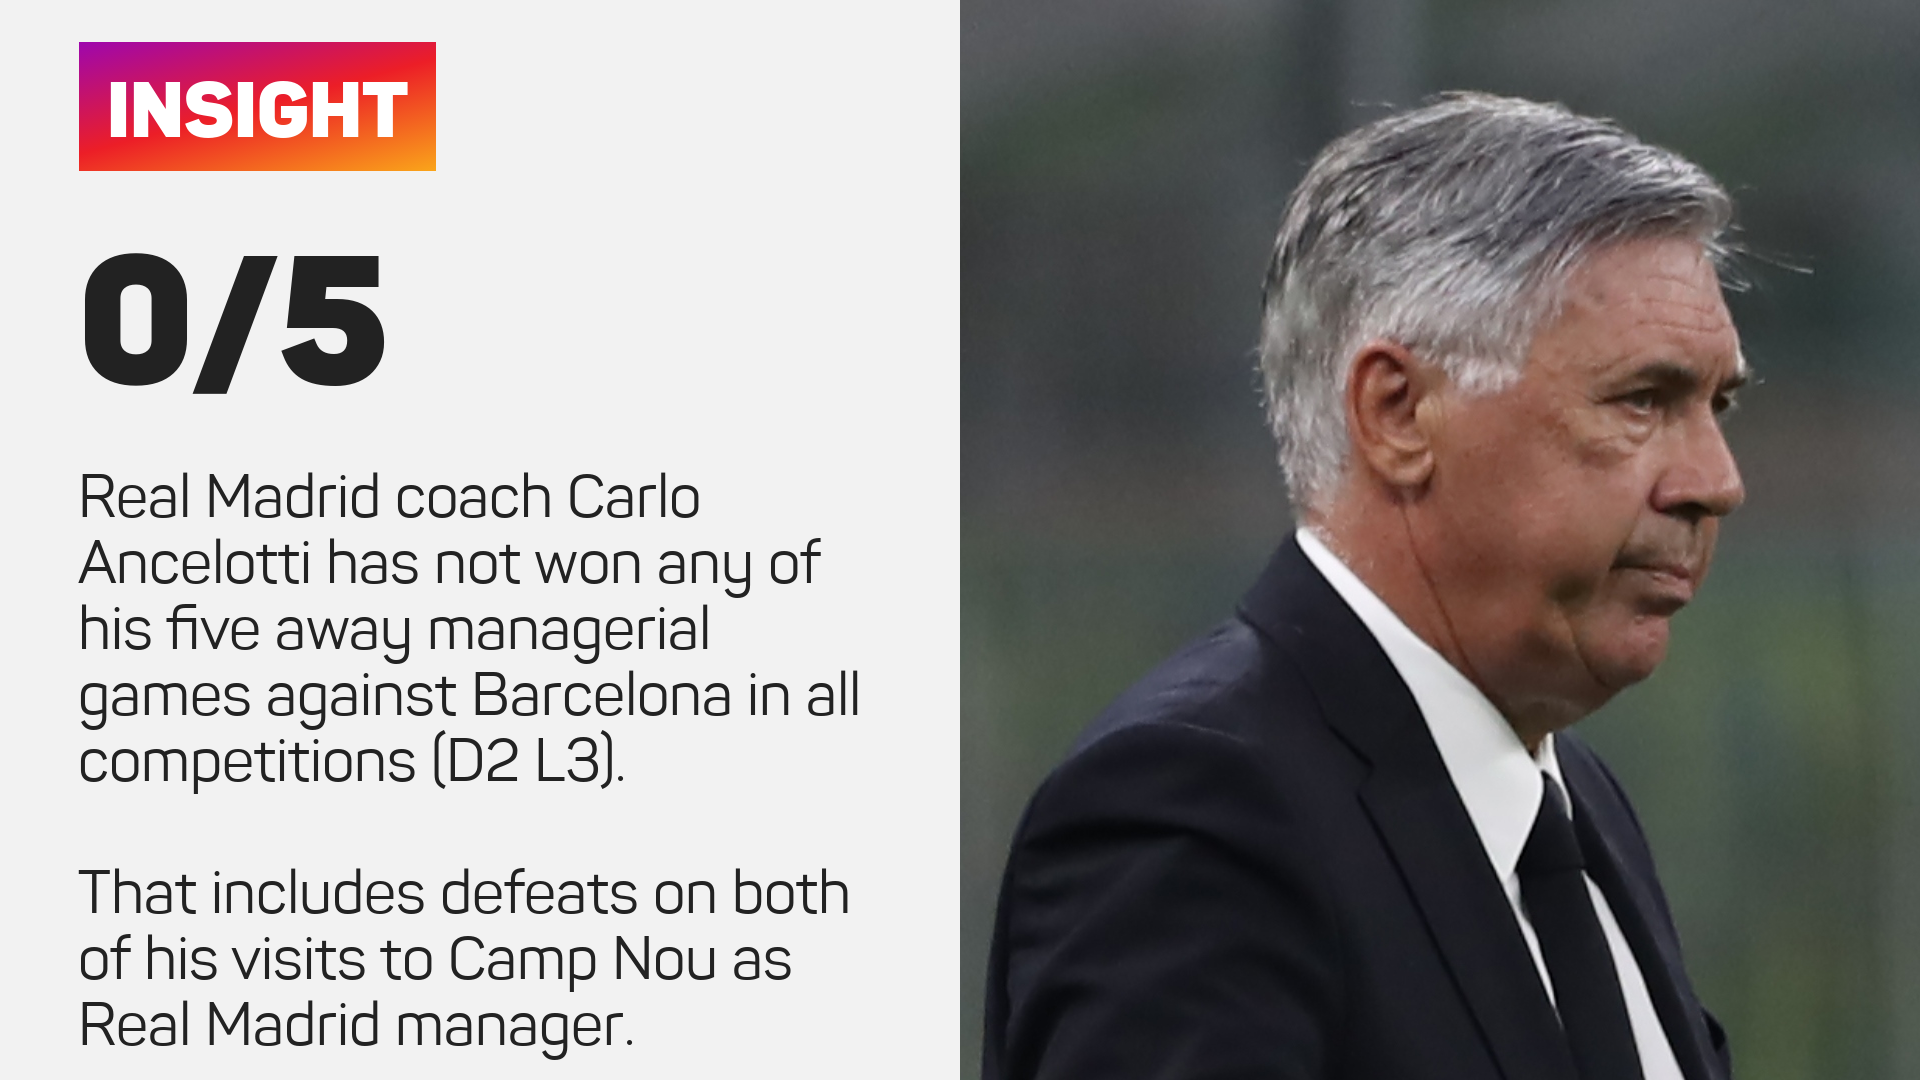 Carlo Ancelotti is winless in five away games against Barcelona